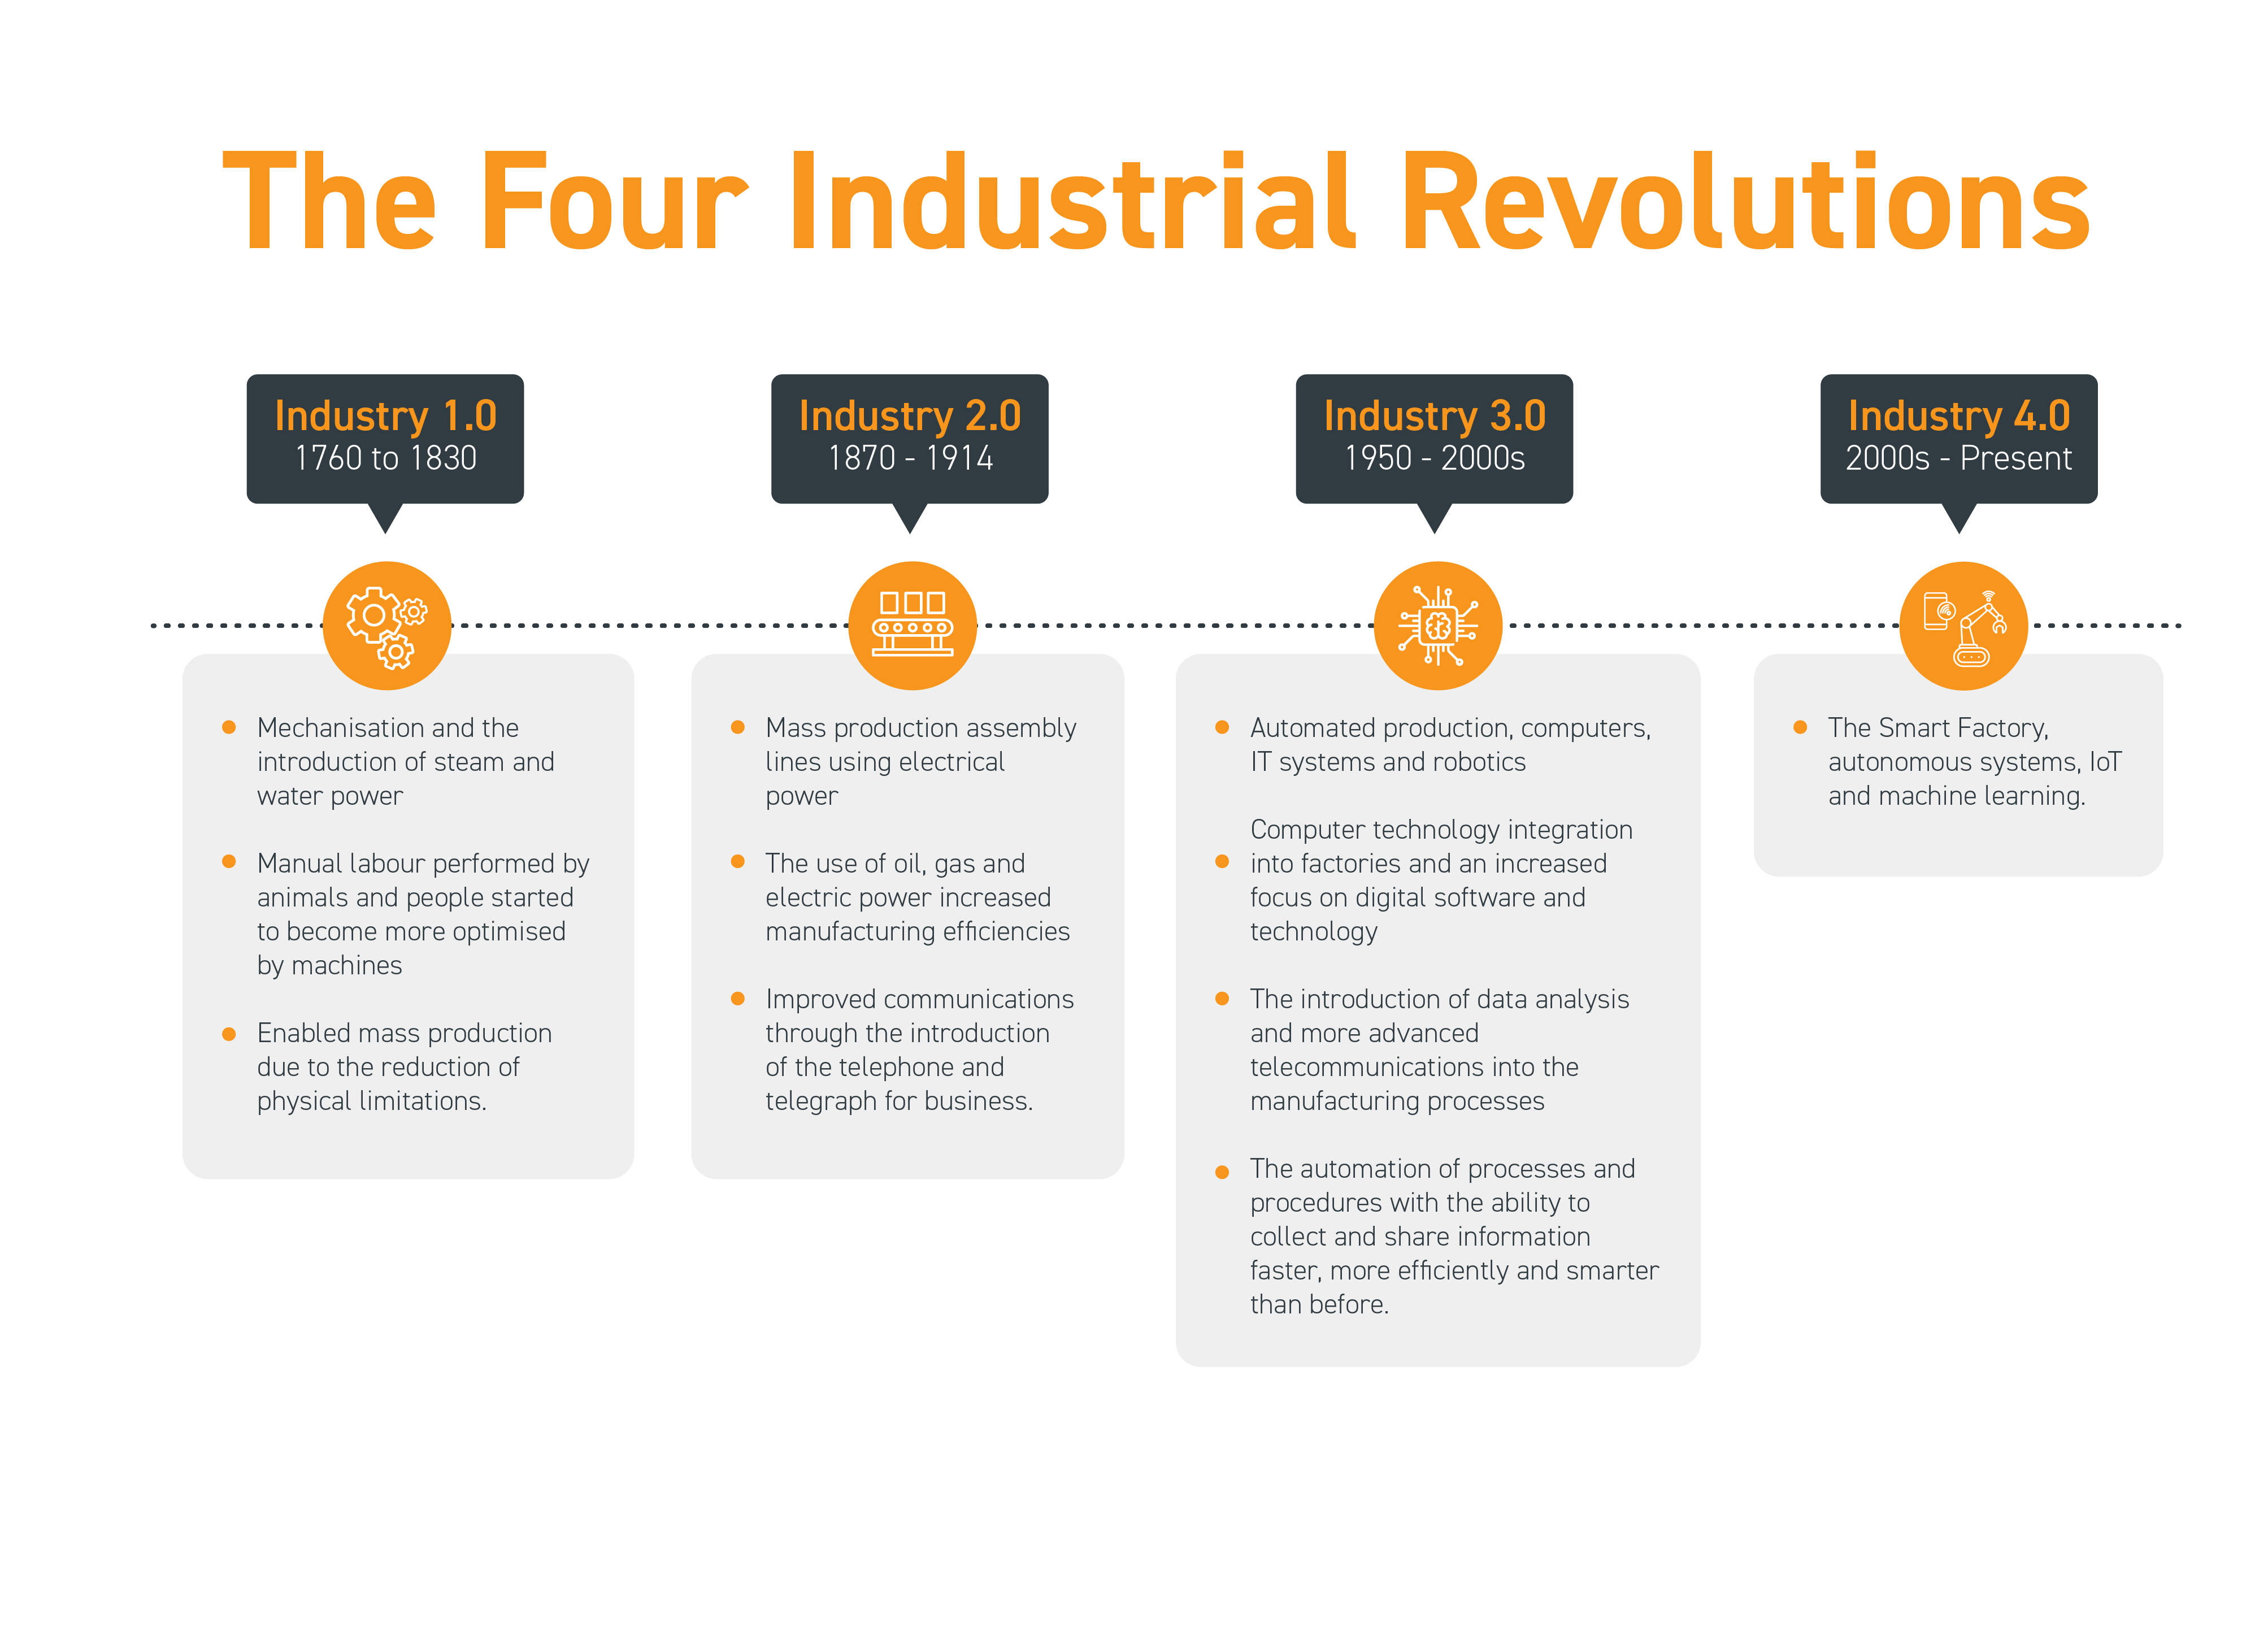 The fourth industrial revolutions